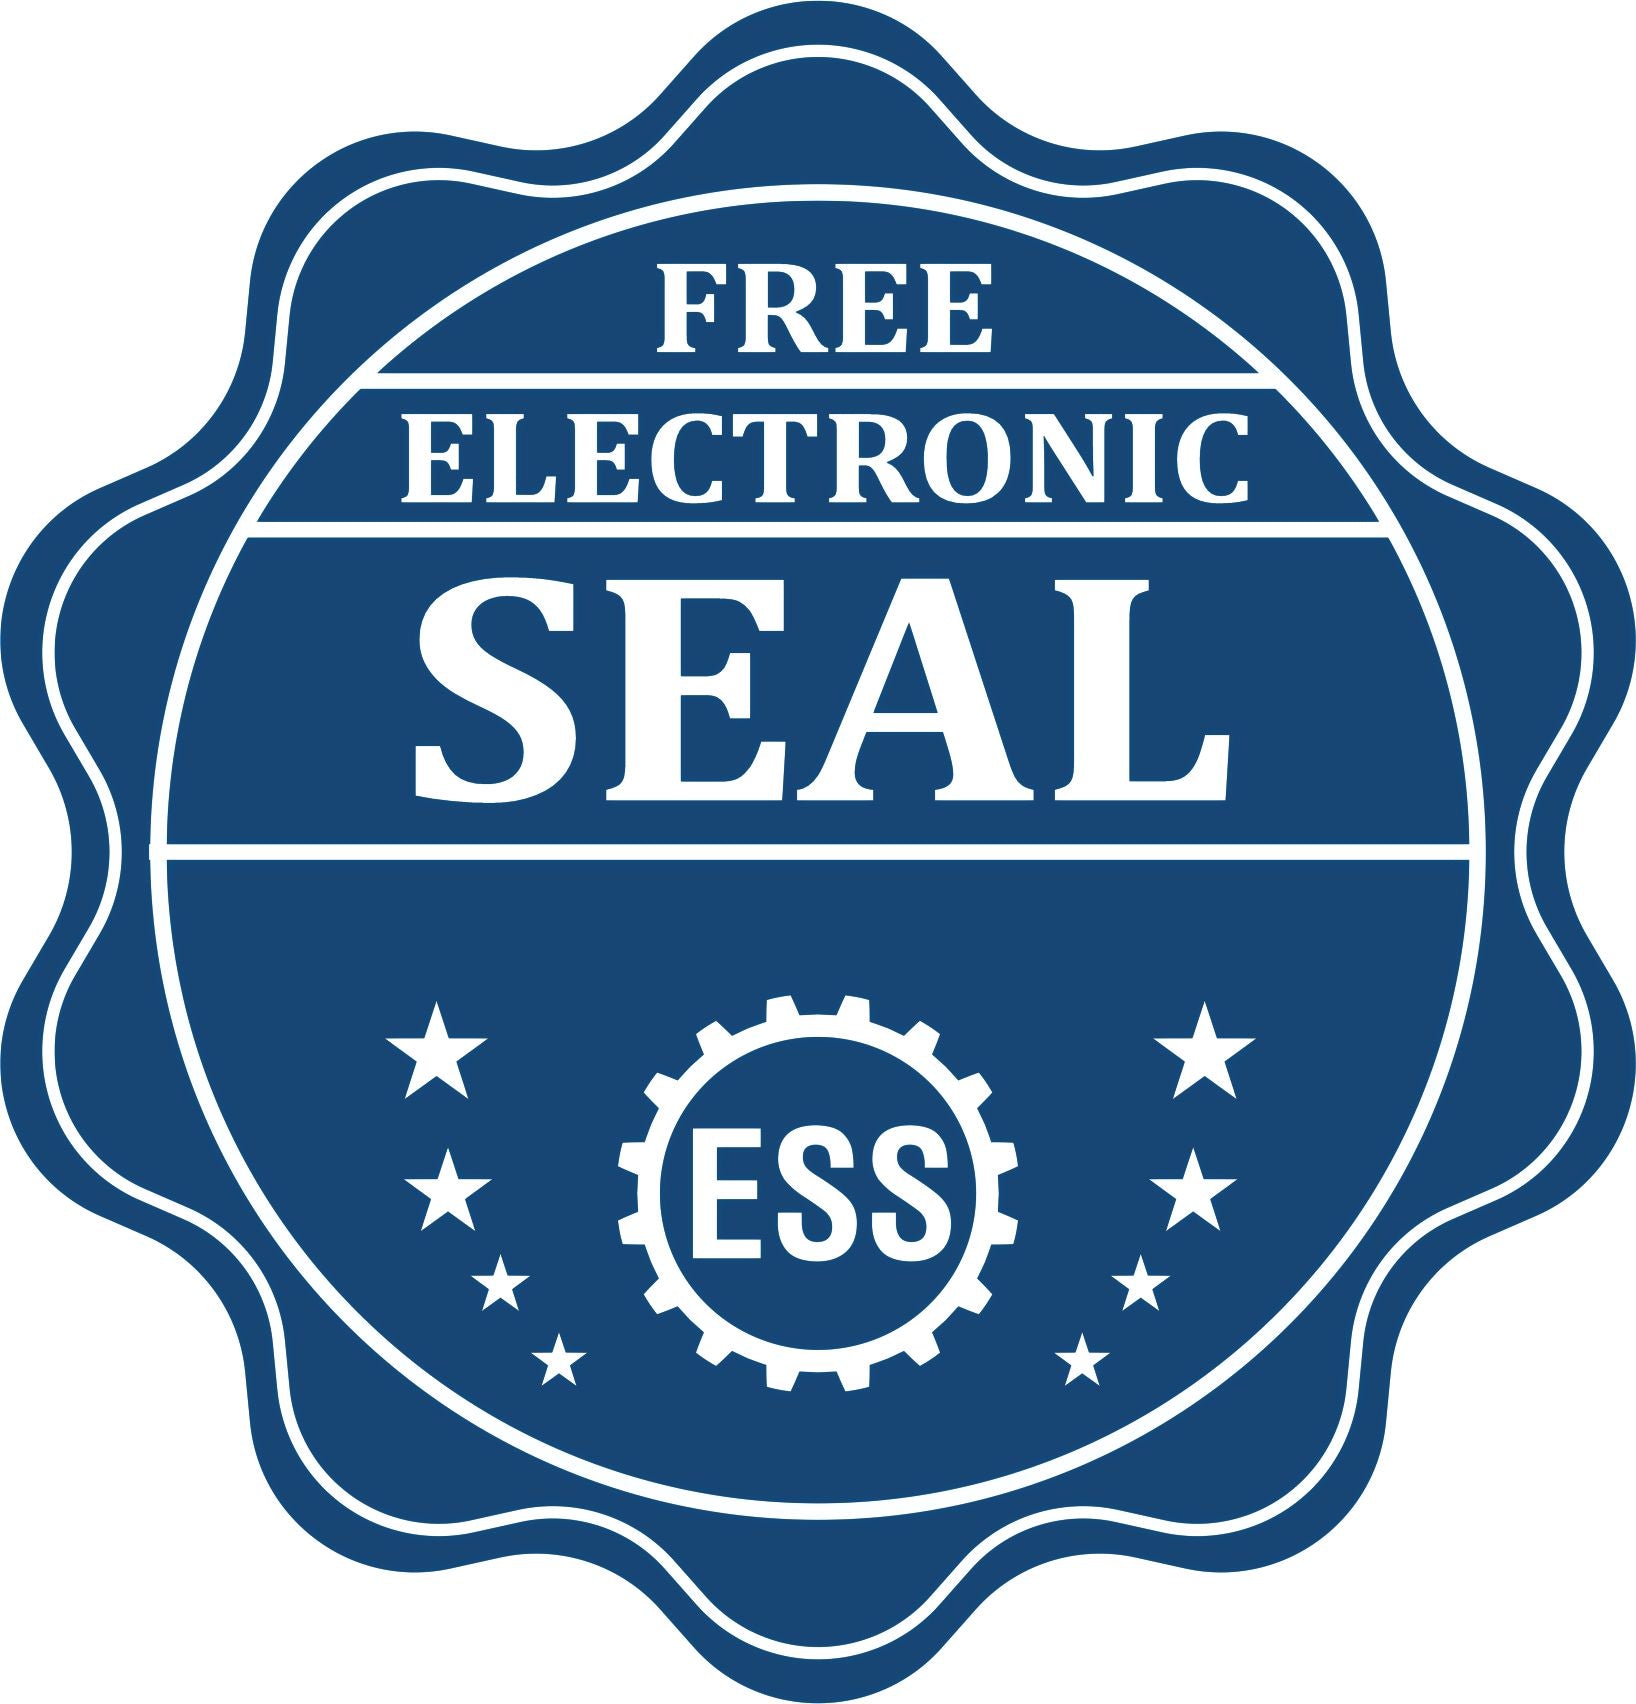 A badge showing a free electronic seal for the PSI Minnesota Notary Stamp with stars and the ESS gear on the emblem.